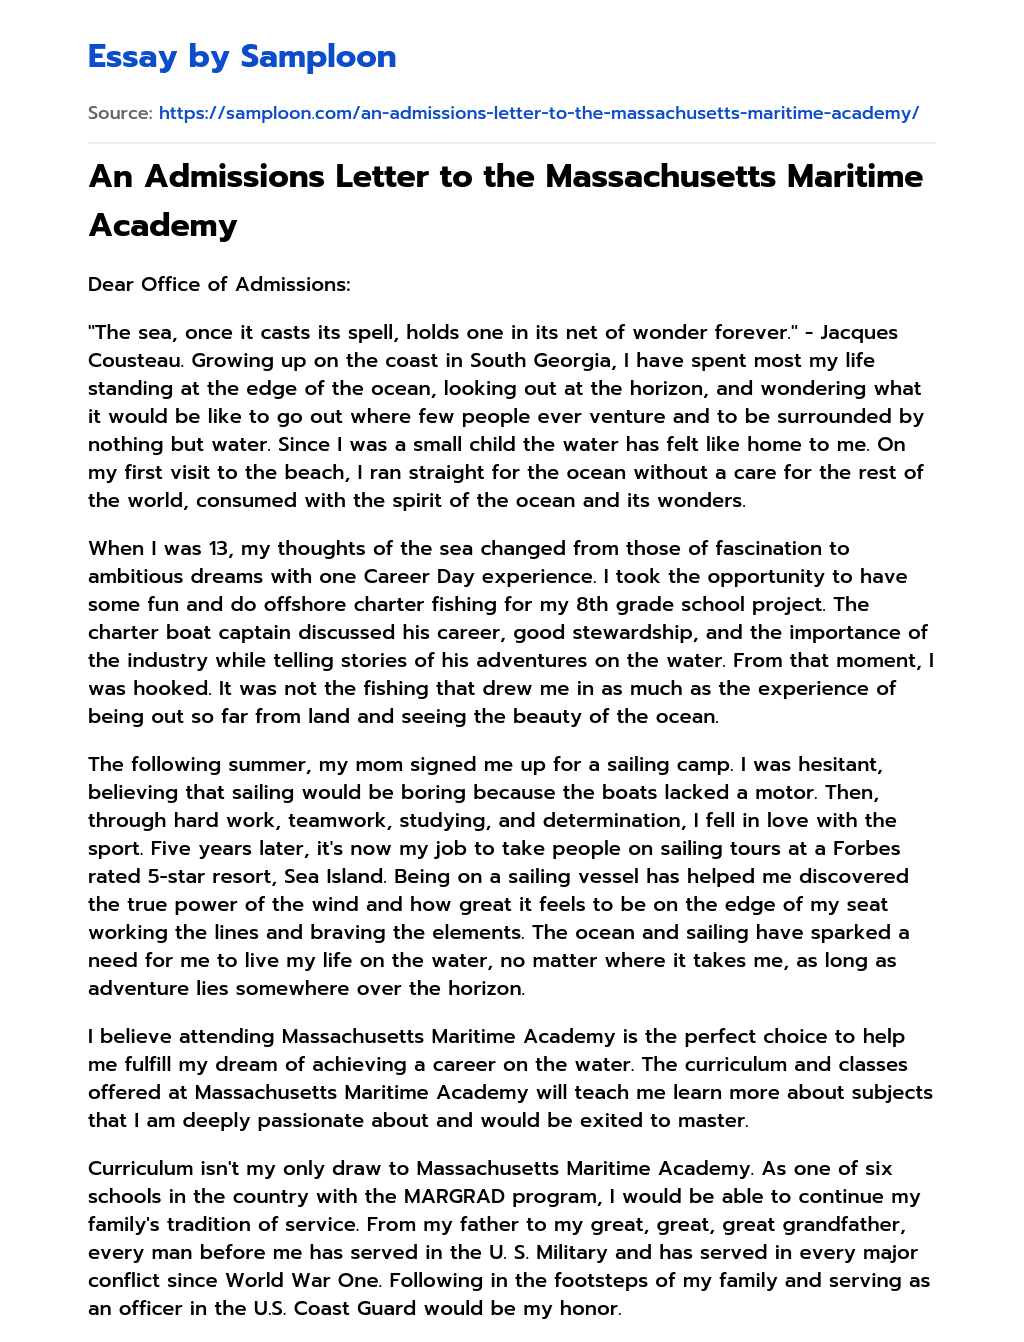 An Admissions Letter to the Massachusetts Maritime Academy essay